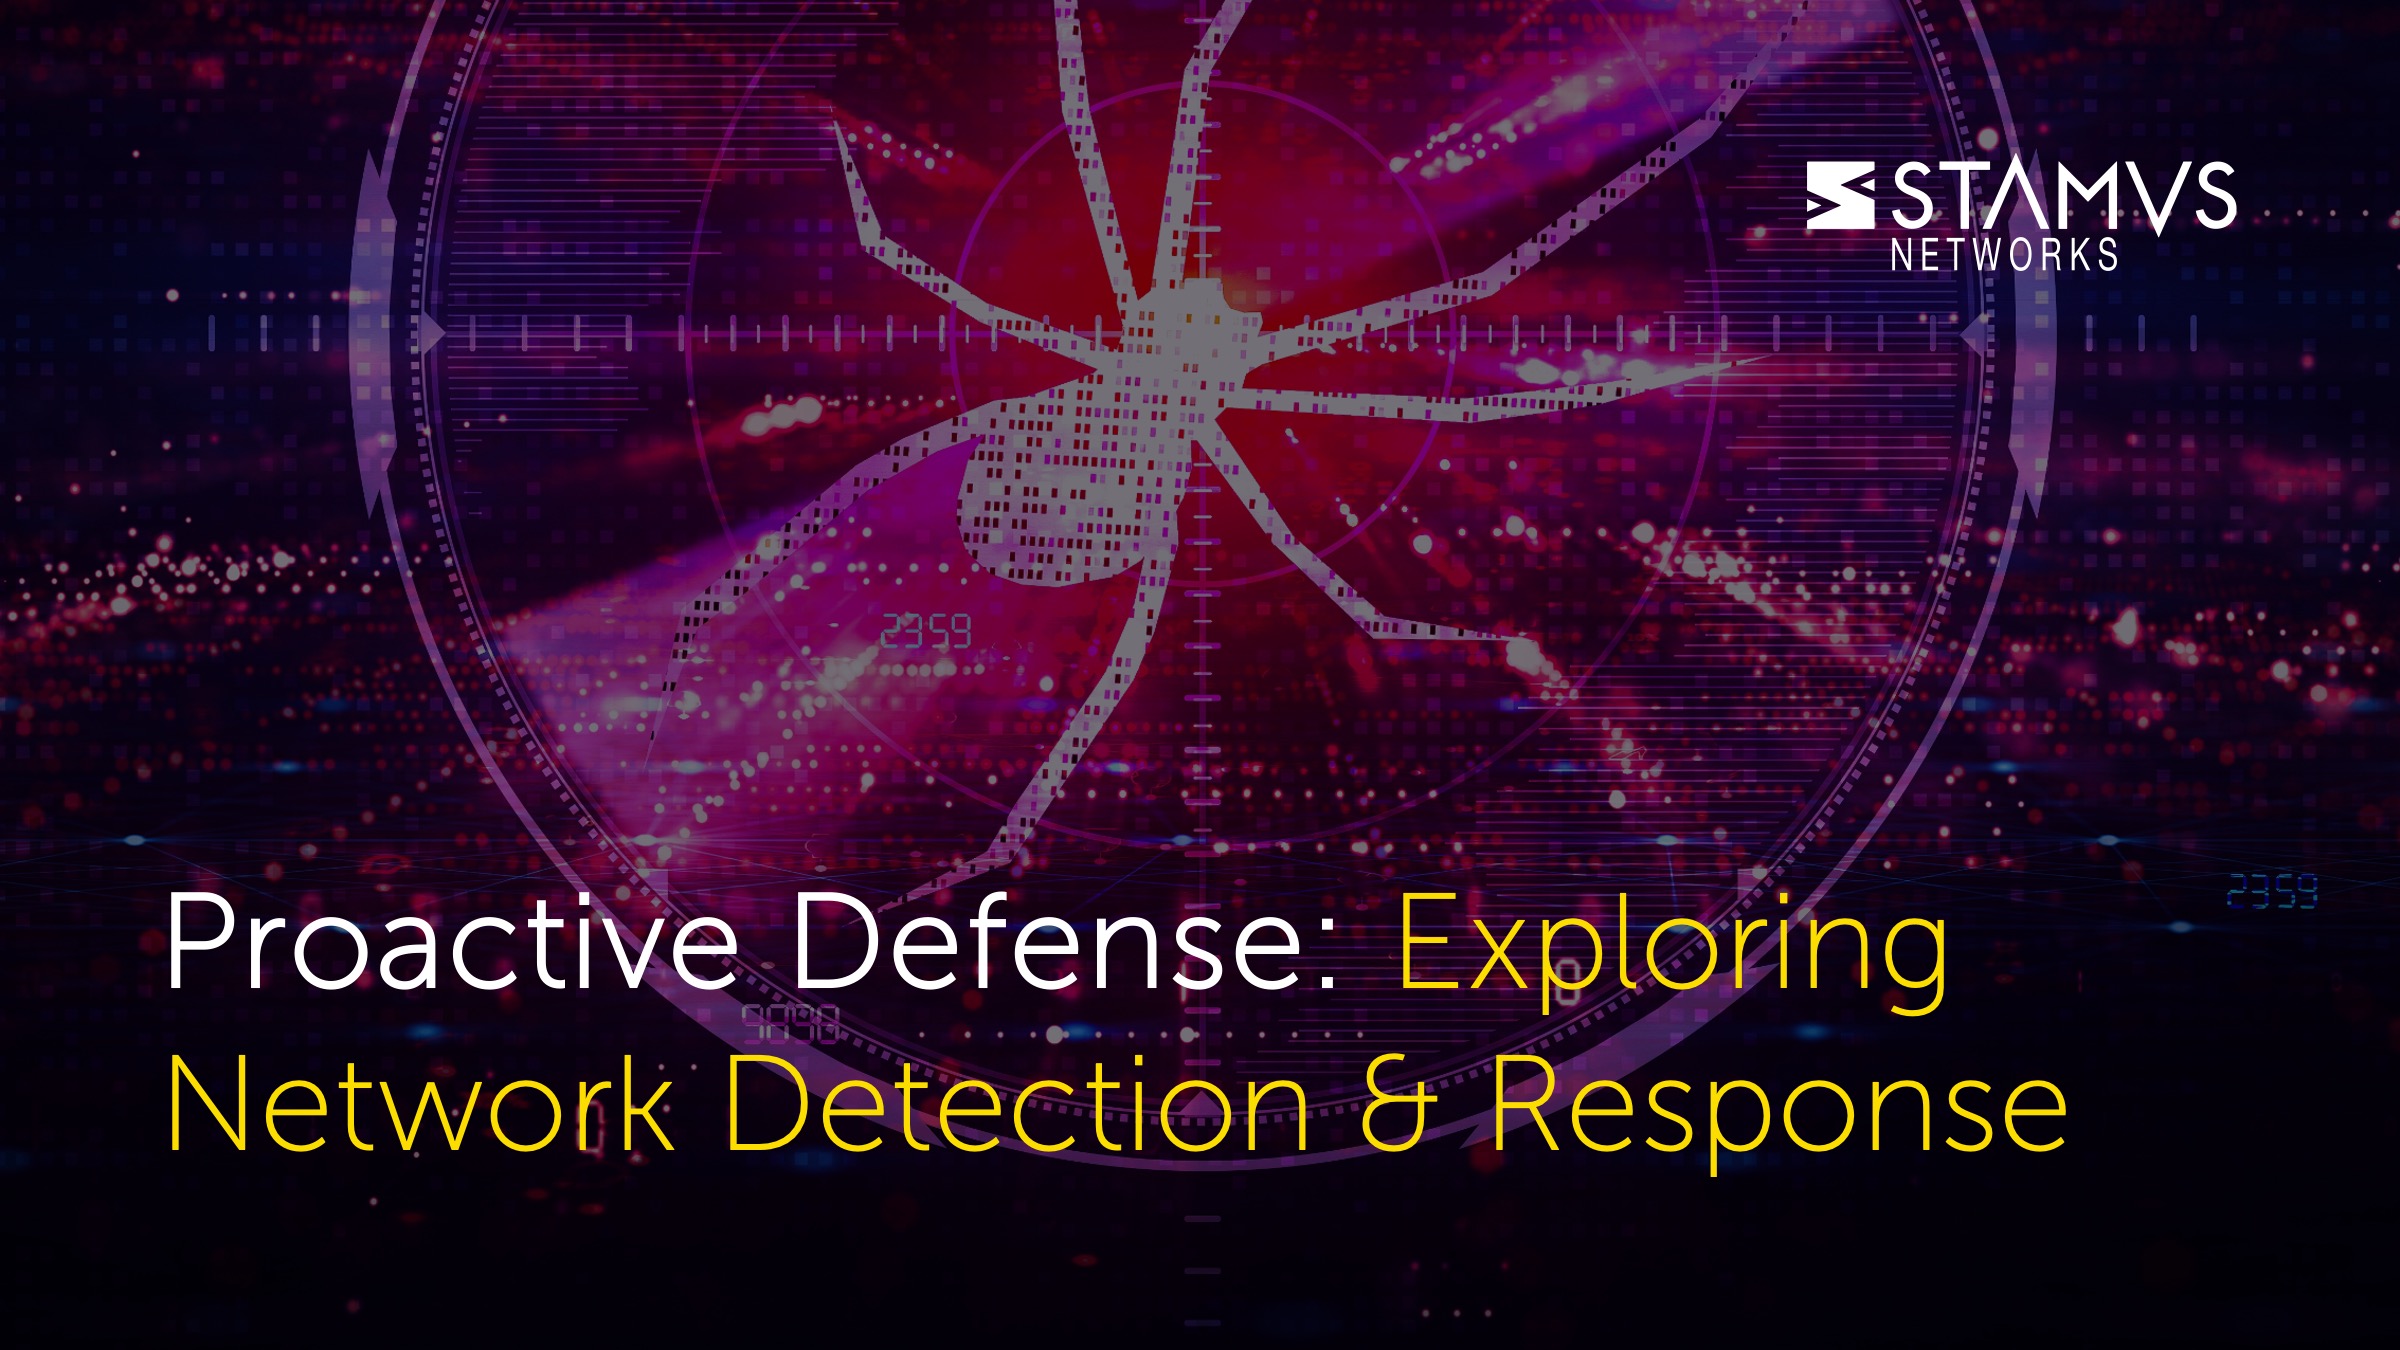 Proactive Defense: Exploring Network Detection and Response by Stamus Networks Team